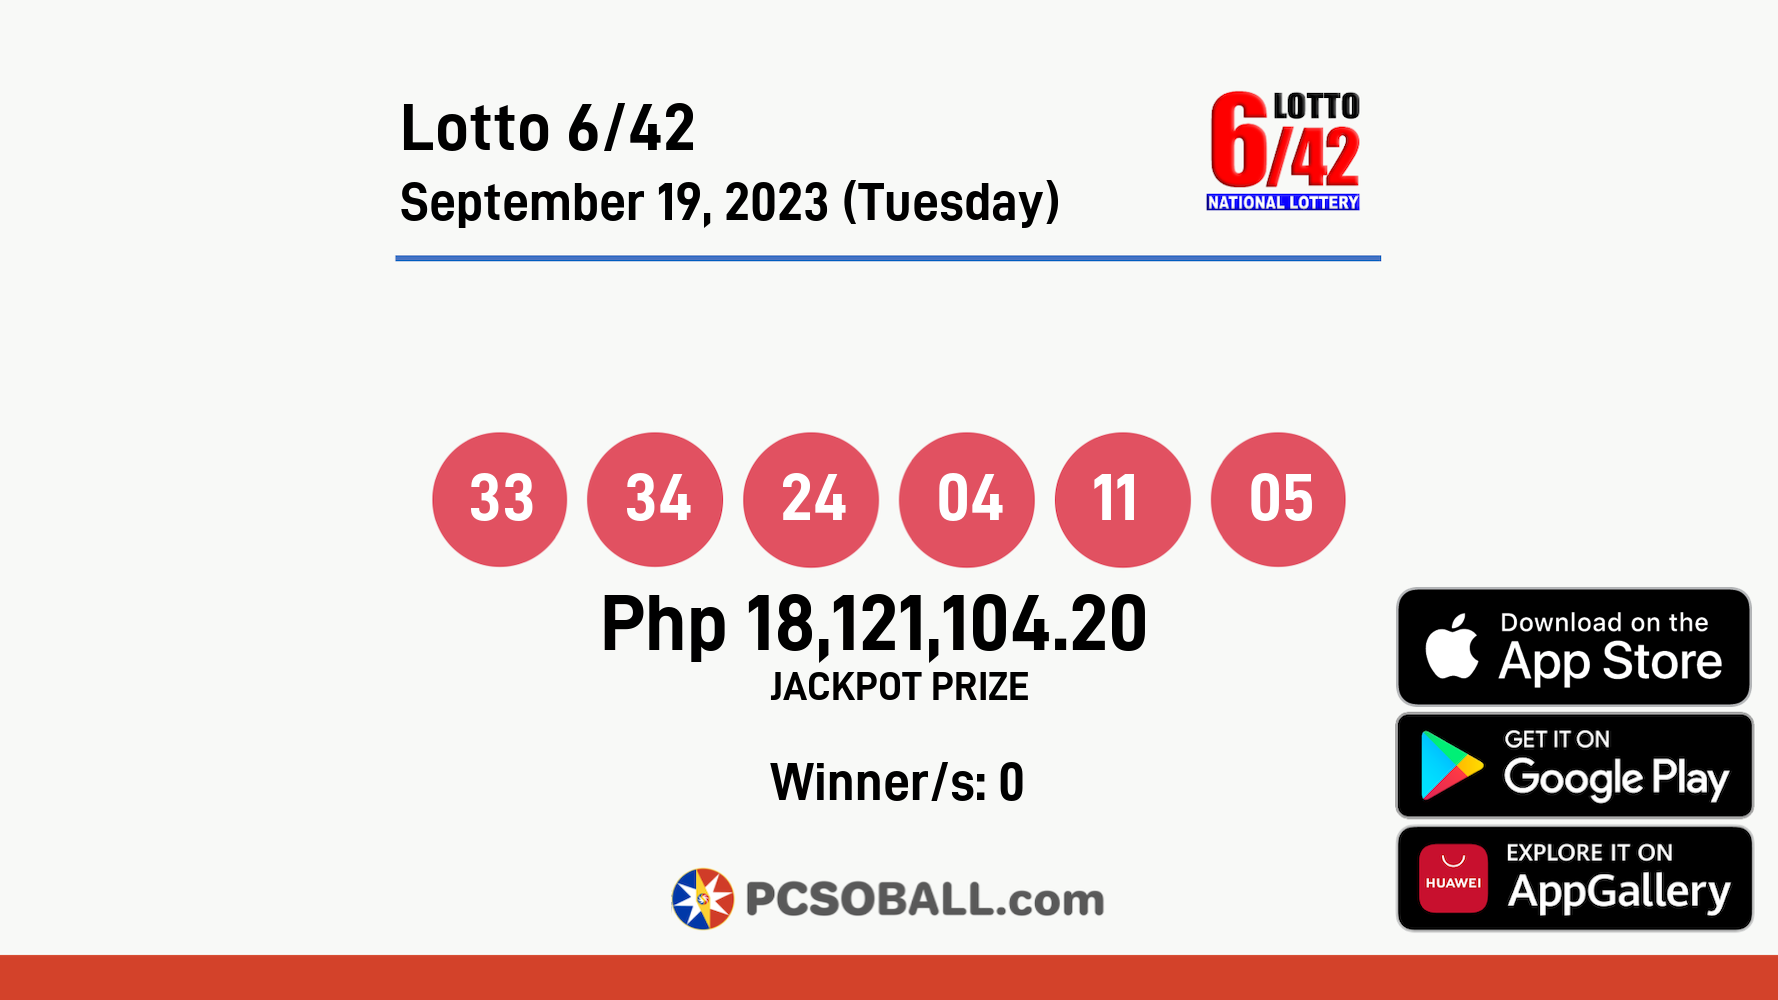 Lotto 6/42 September 19, 2023 (Tuesday) Result